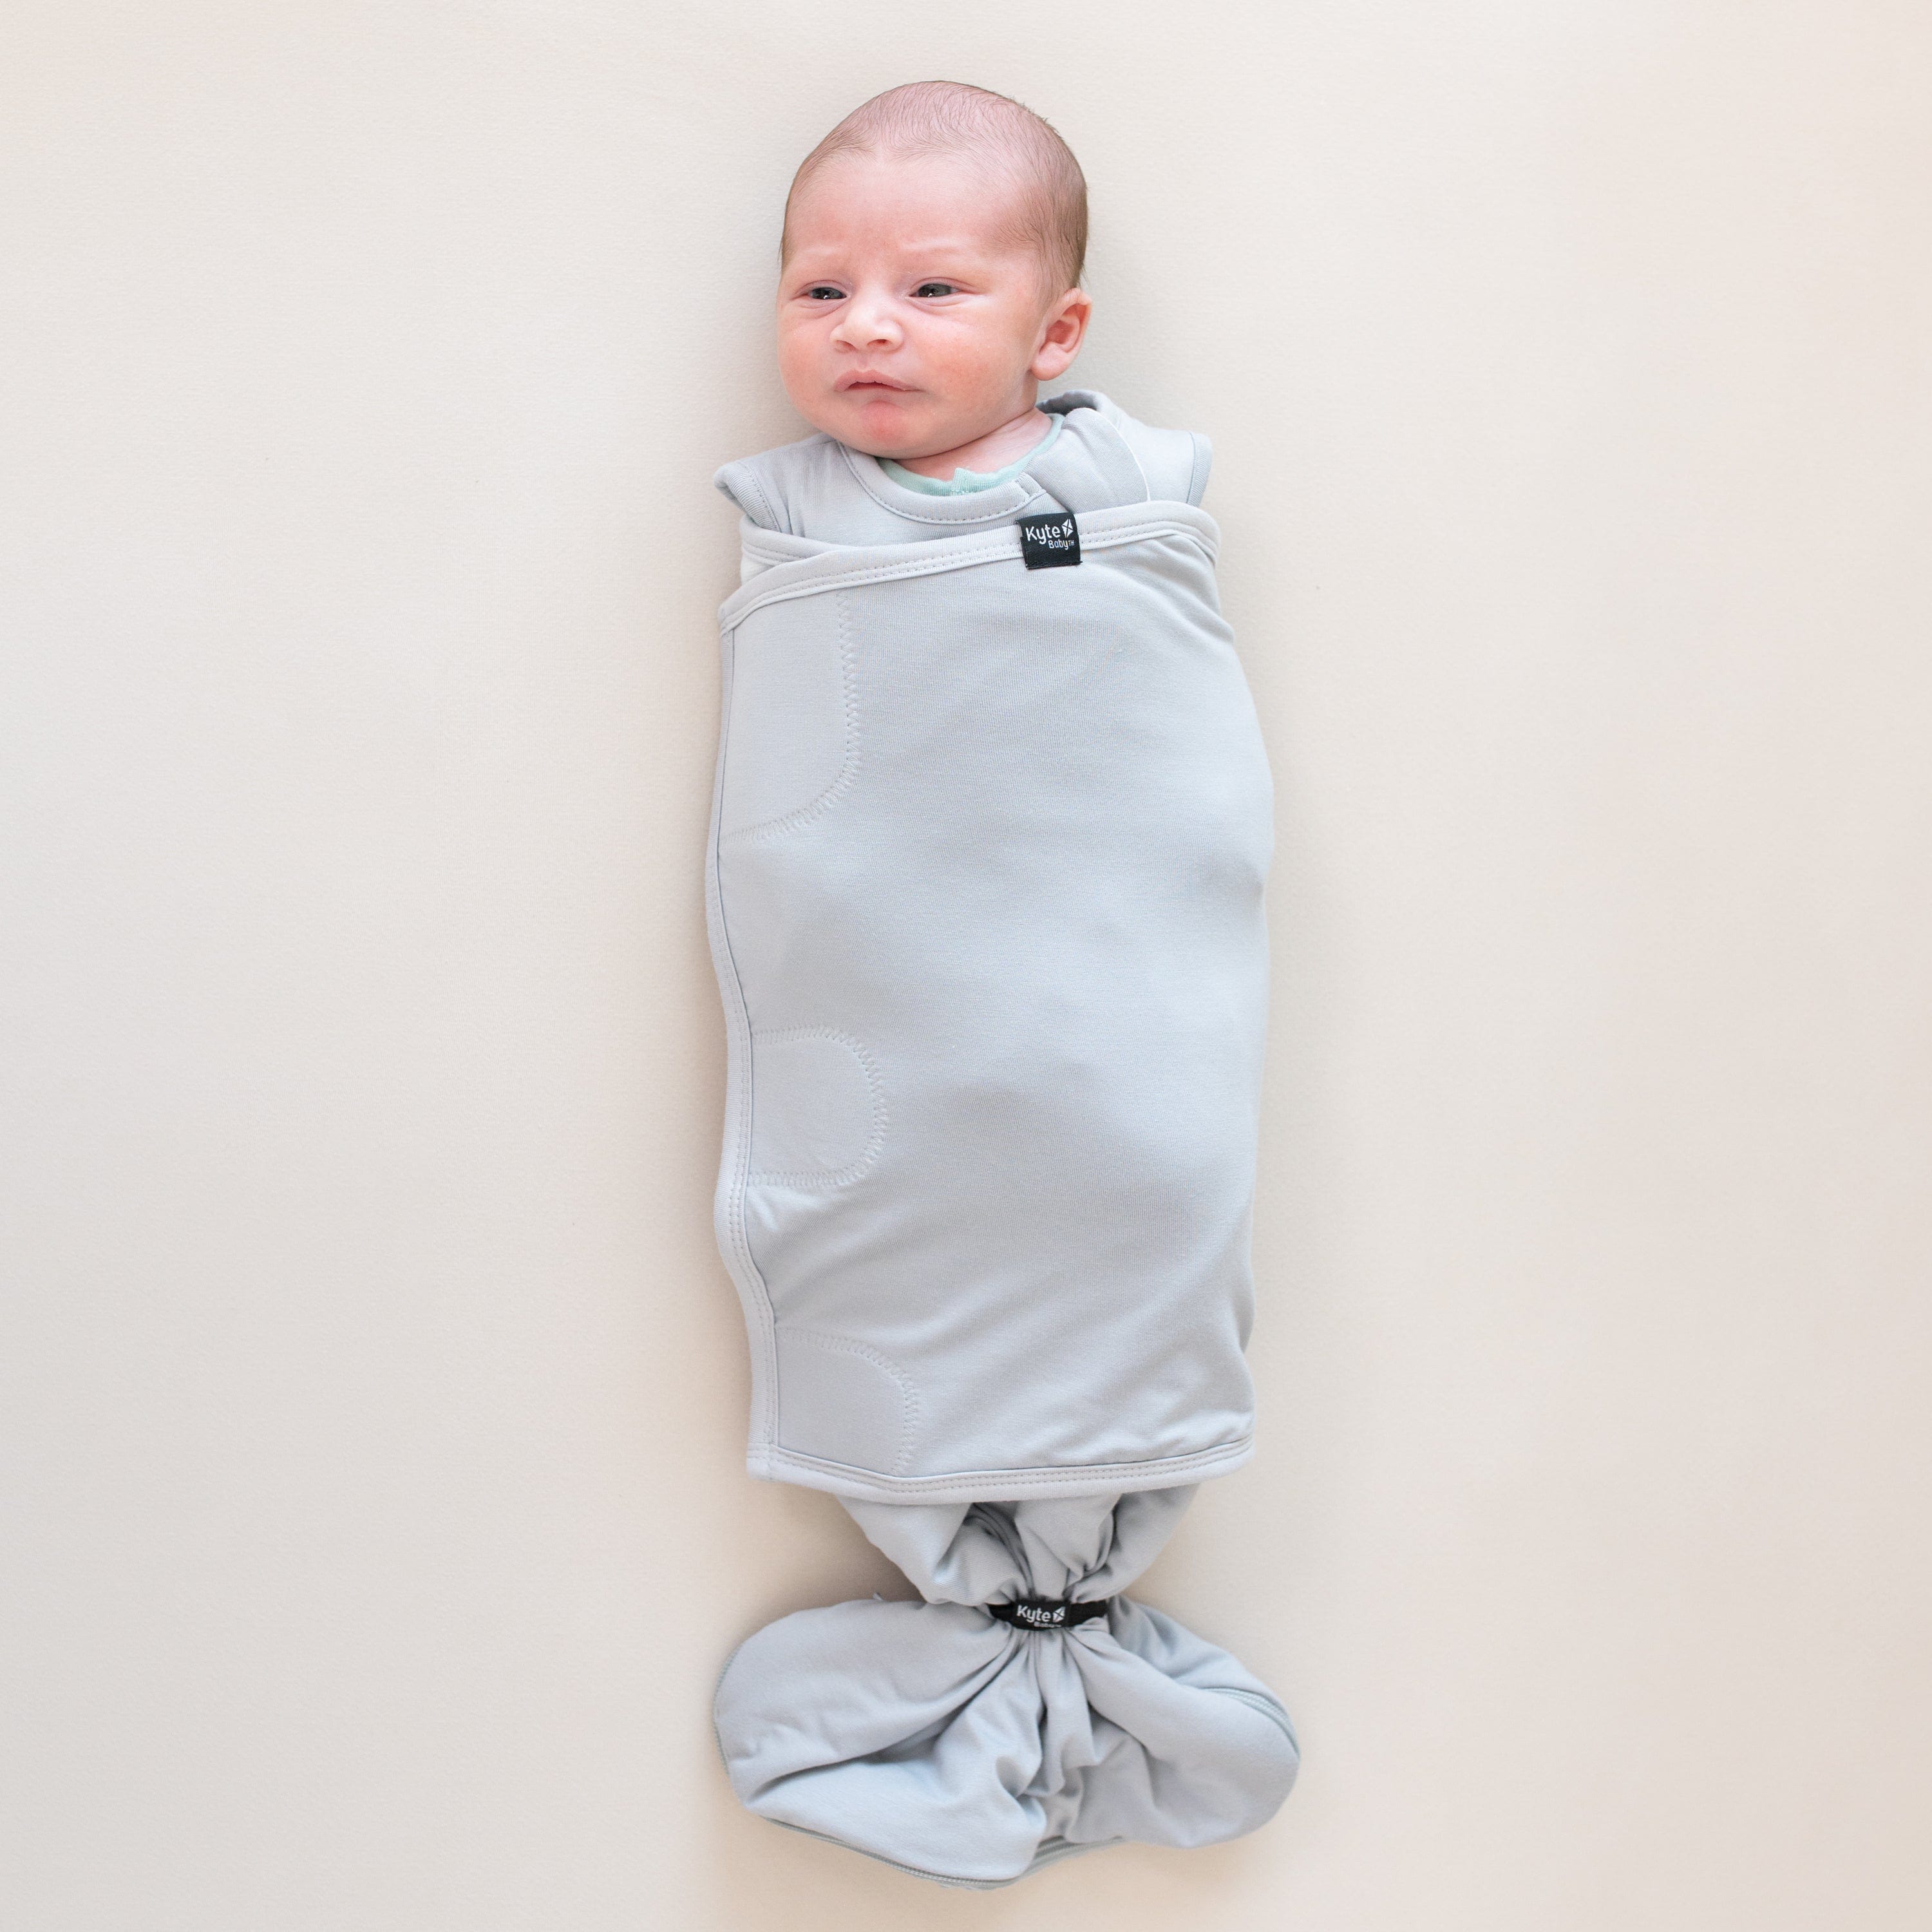 Baby wearing Kyte Baby Sleep Bag Swaddler in Storm with elastic band